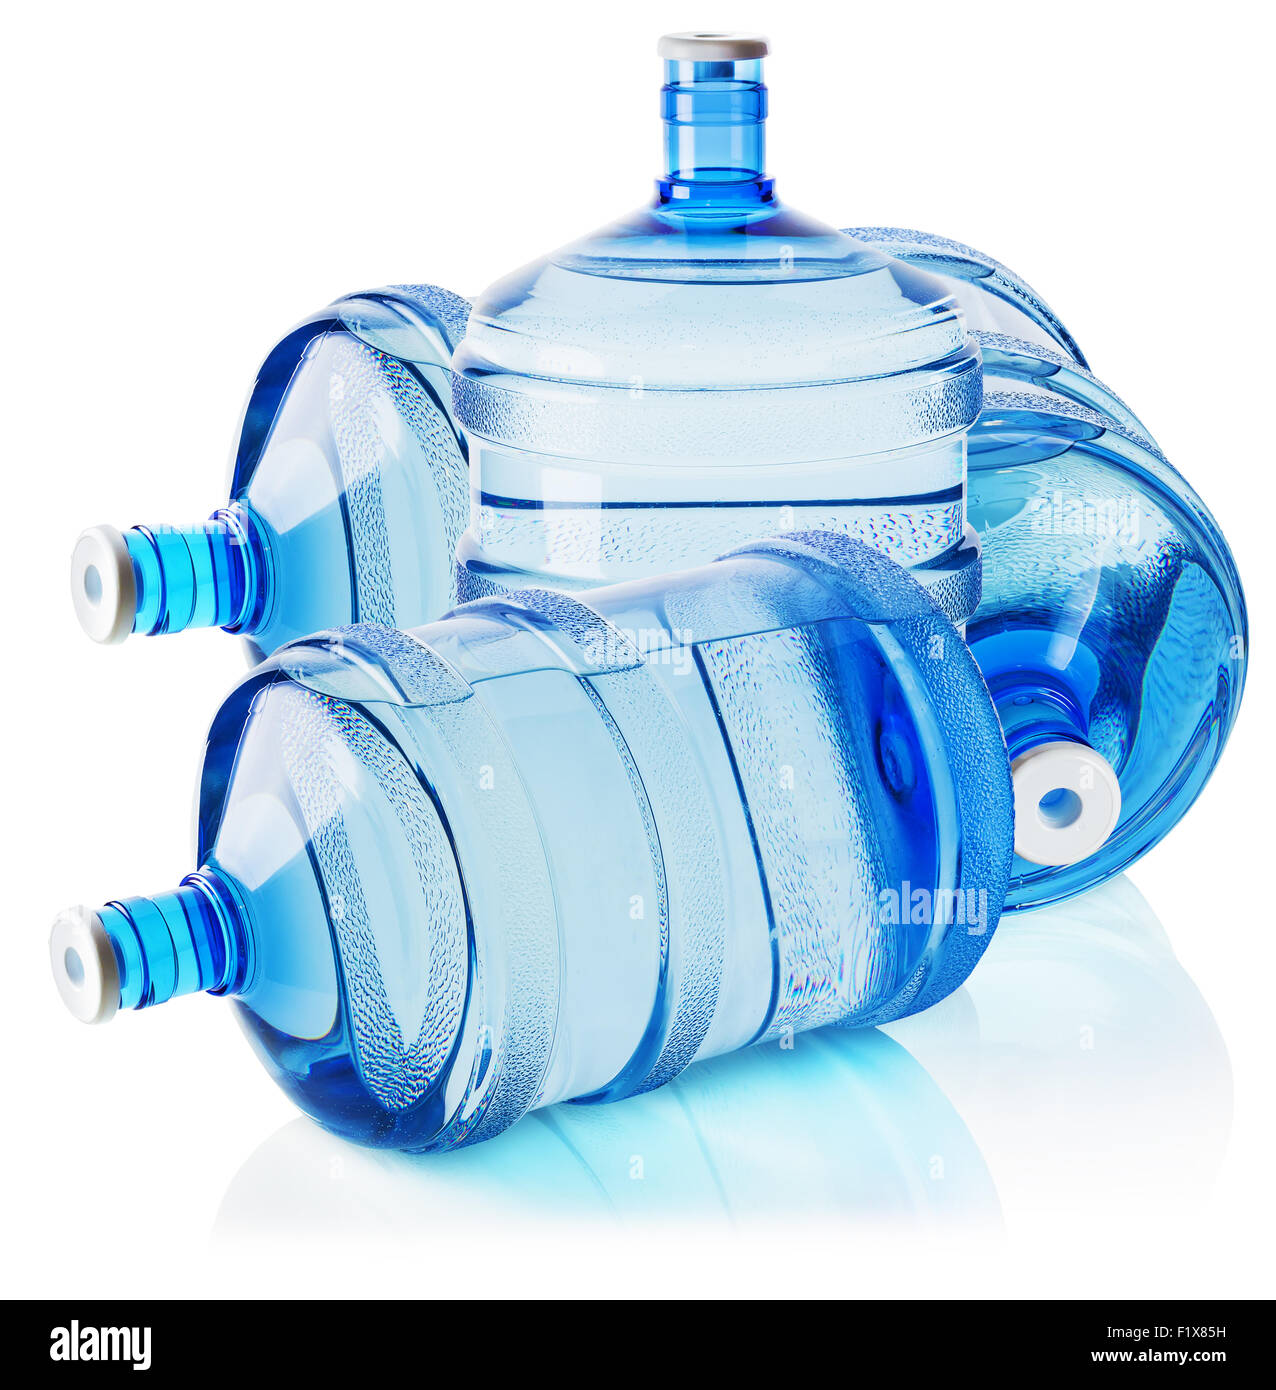 https://c8.alamy.com/comp/F1X85H/big-bottles-of-water-isolated-on-the-white-background-F1X85H.jpg